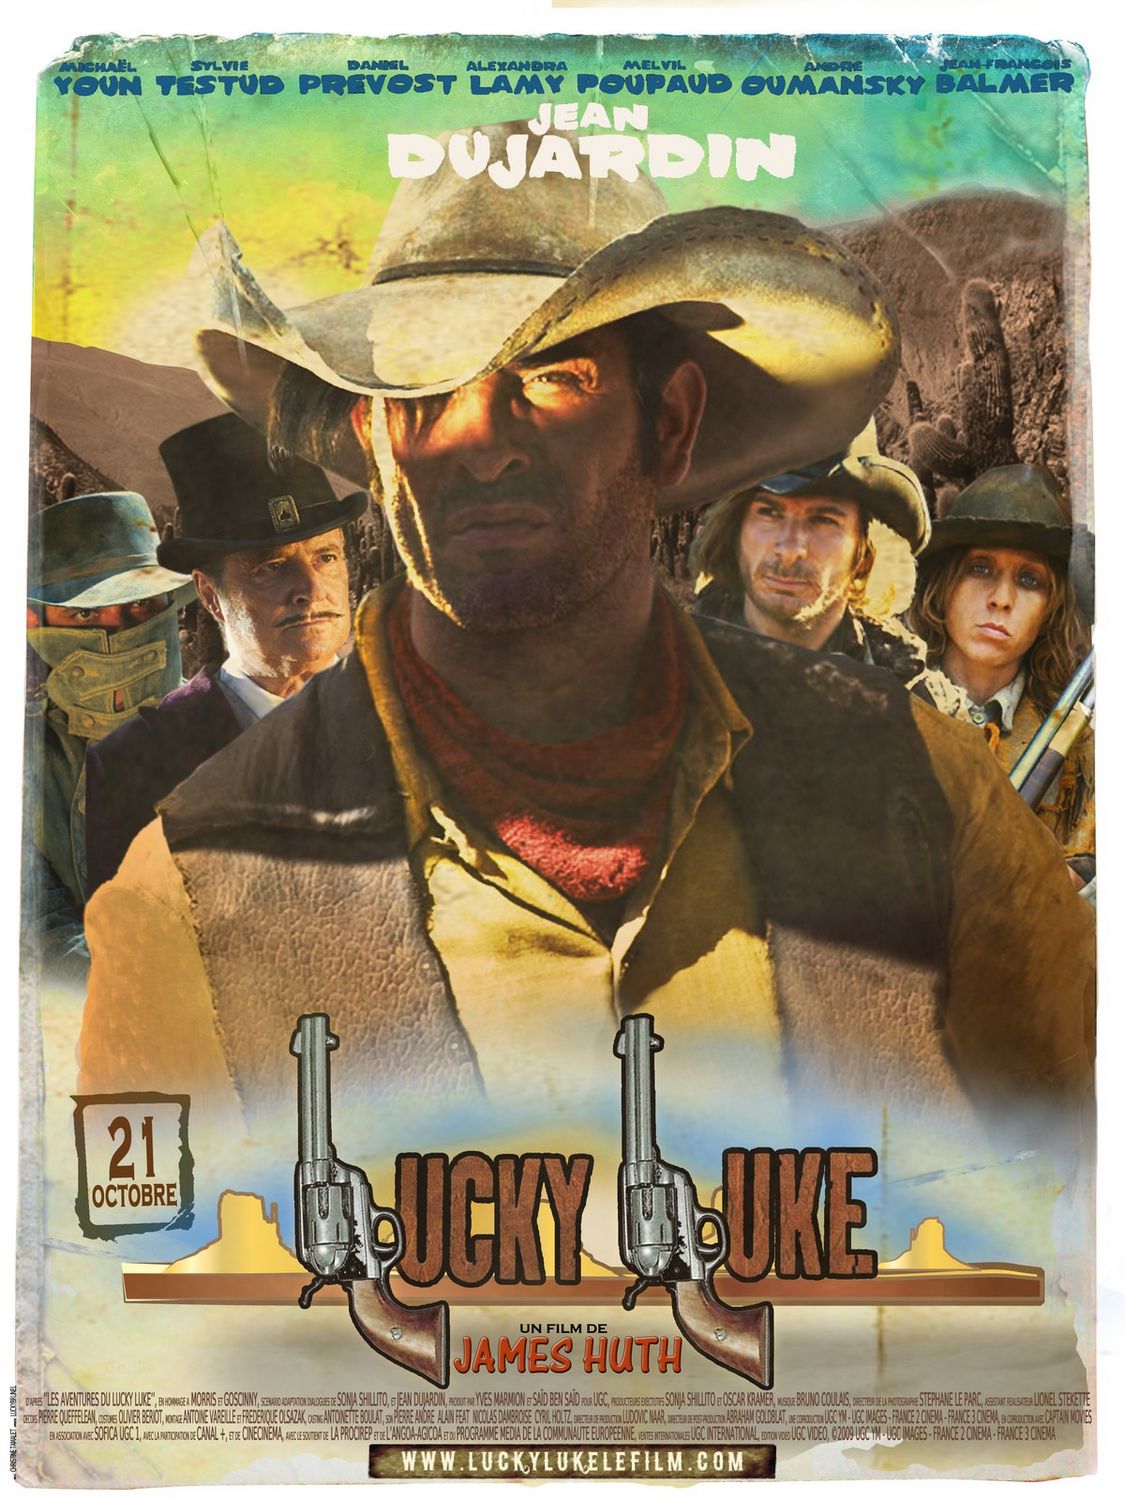 Extra Large Movie Poster Image for Lucky Luke (#5 of 5)